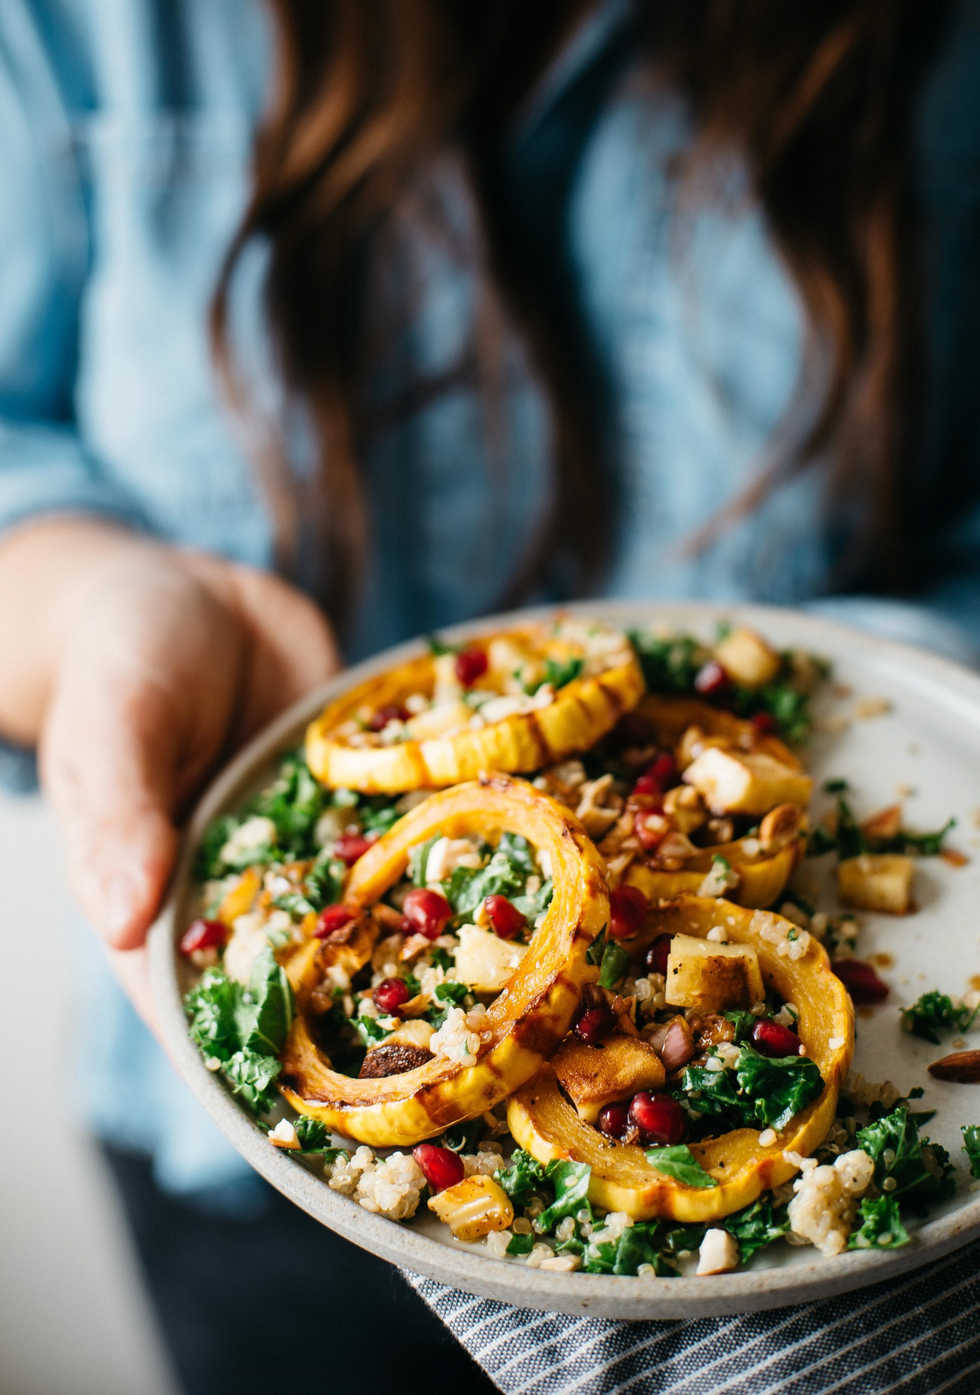 Warm Squash, Parsnip and Kale Salad with Pomegranate Dressing